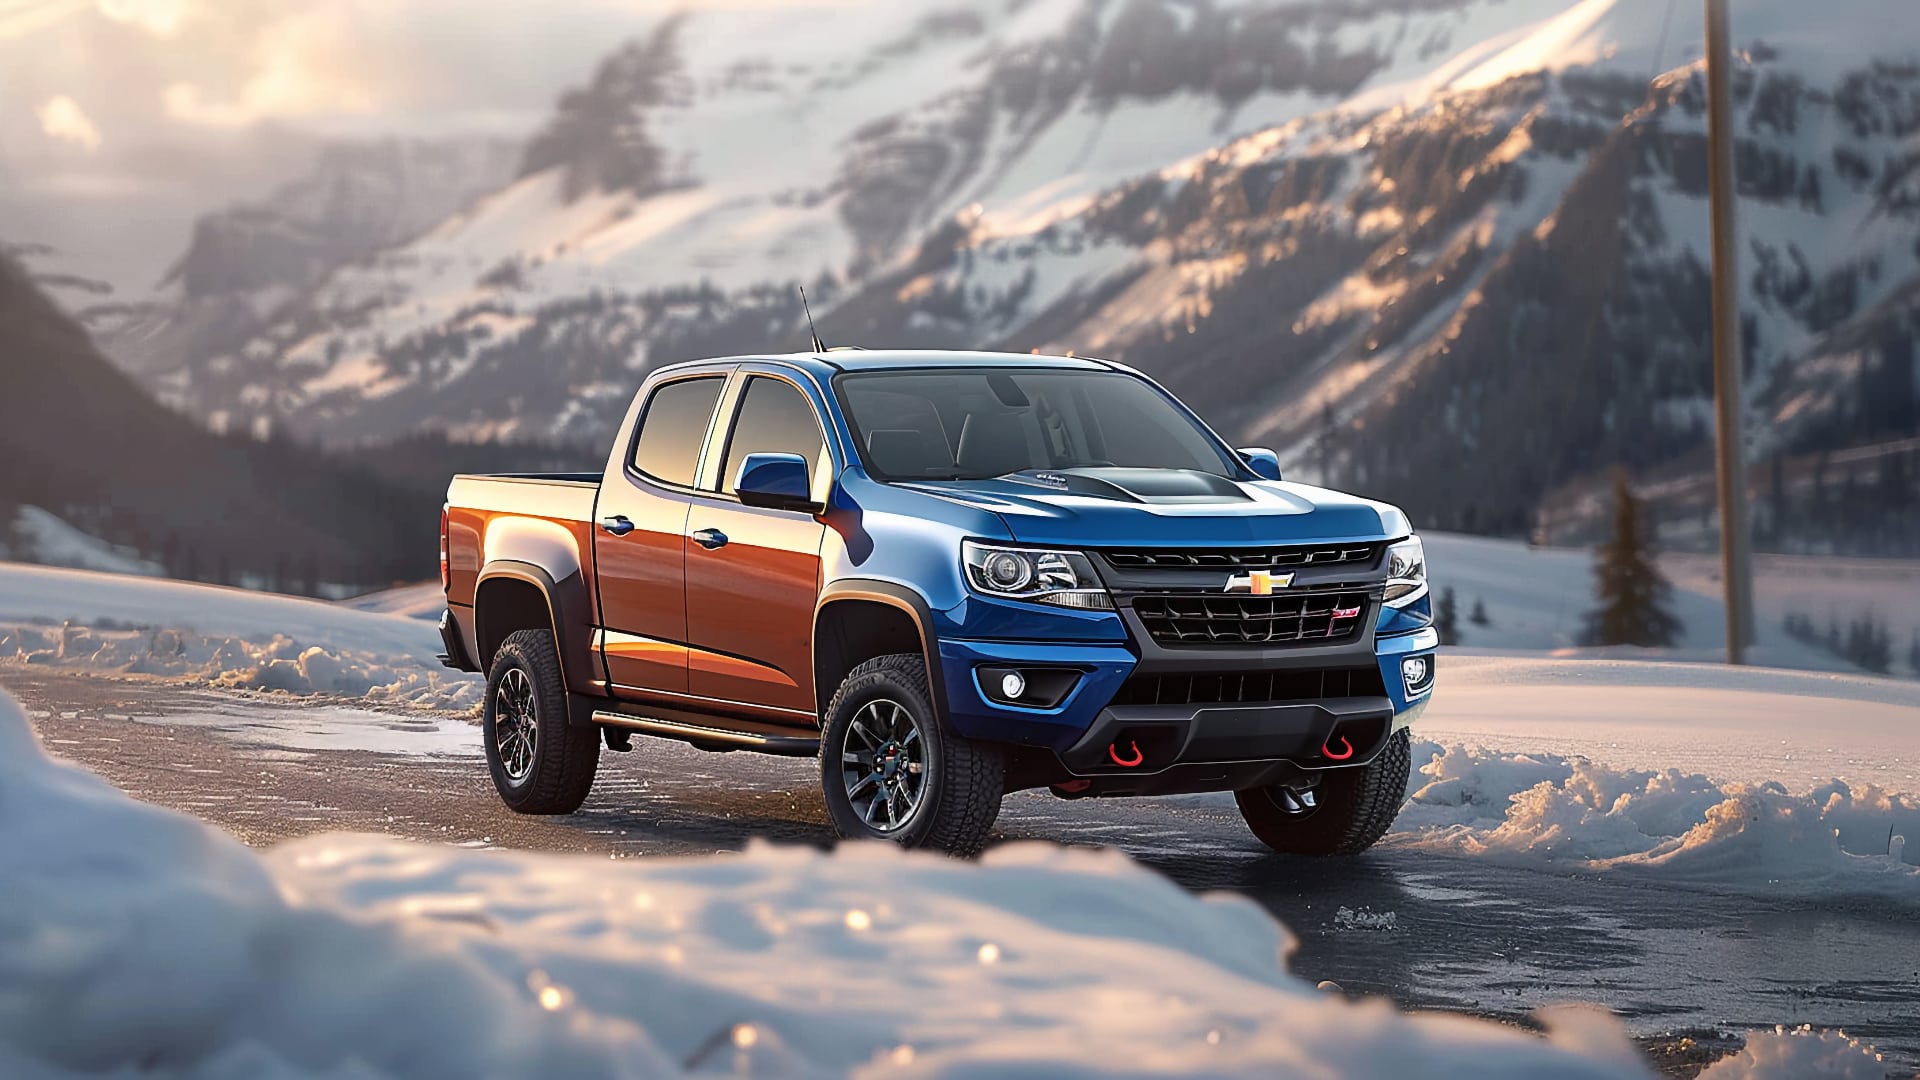 The 2019 Chevrolet Colorado is cruising down a snowy road.